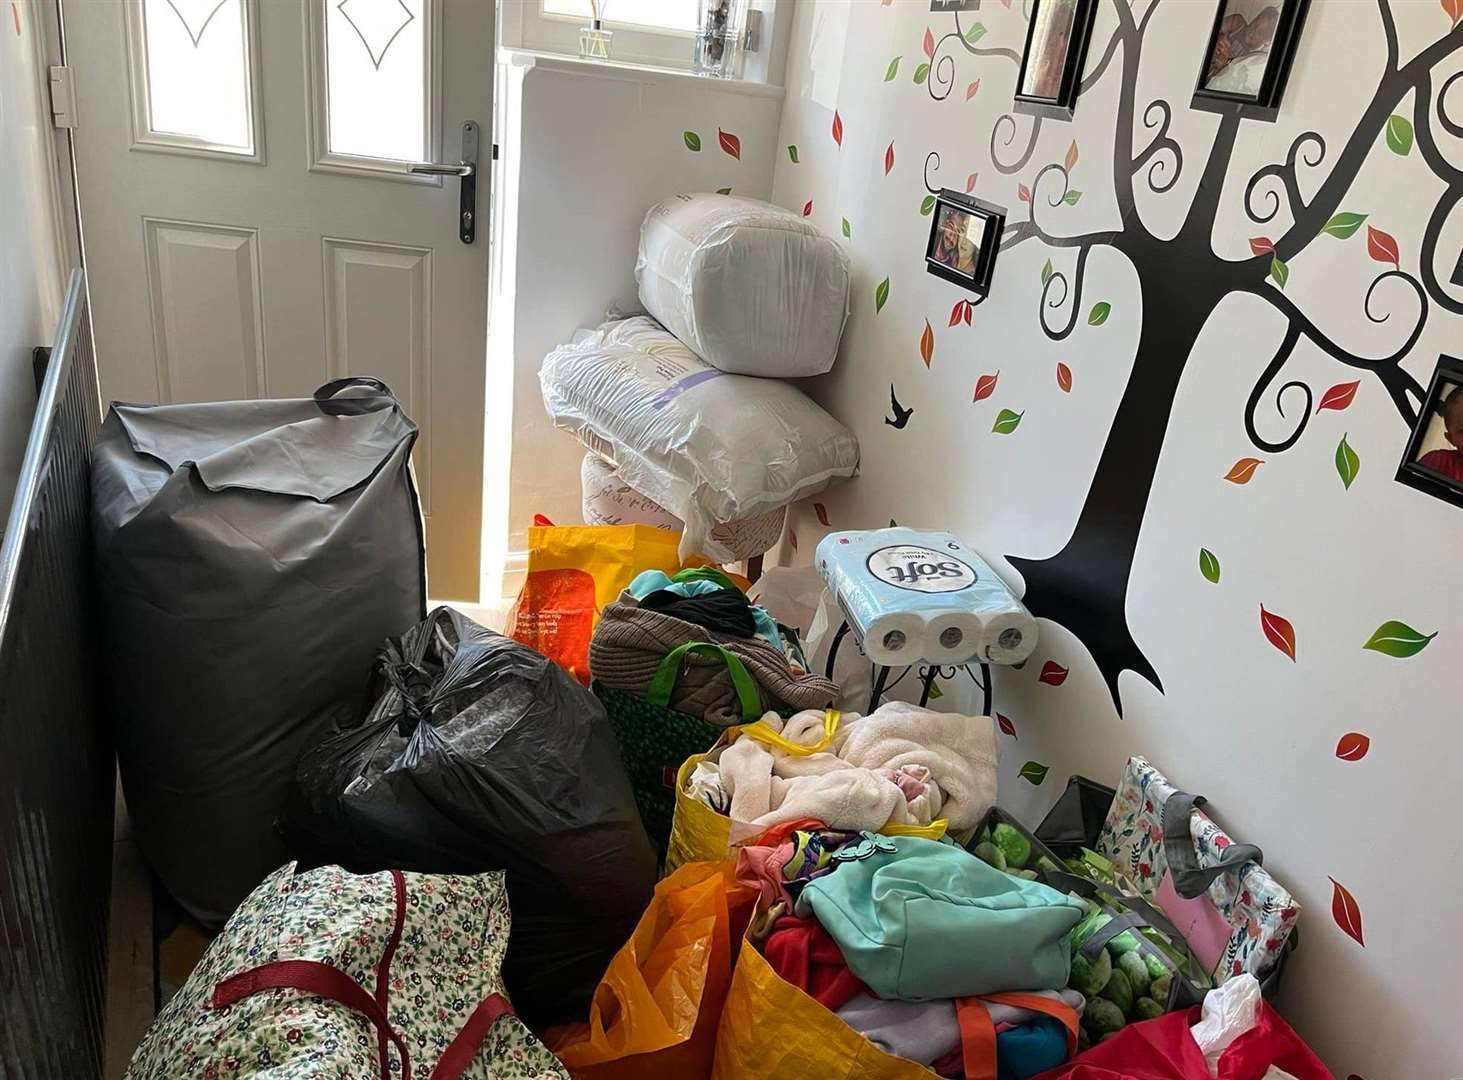 Niece Debbie Goodall has been collecting donations for her aunt and uncle at her home in Dartford after the couple's home in Crayford Way was ravaged in a fire. Photo: Debbie Goodall